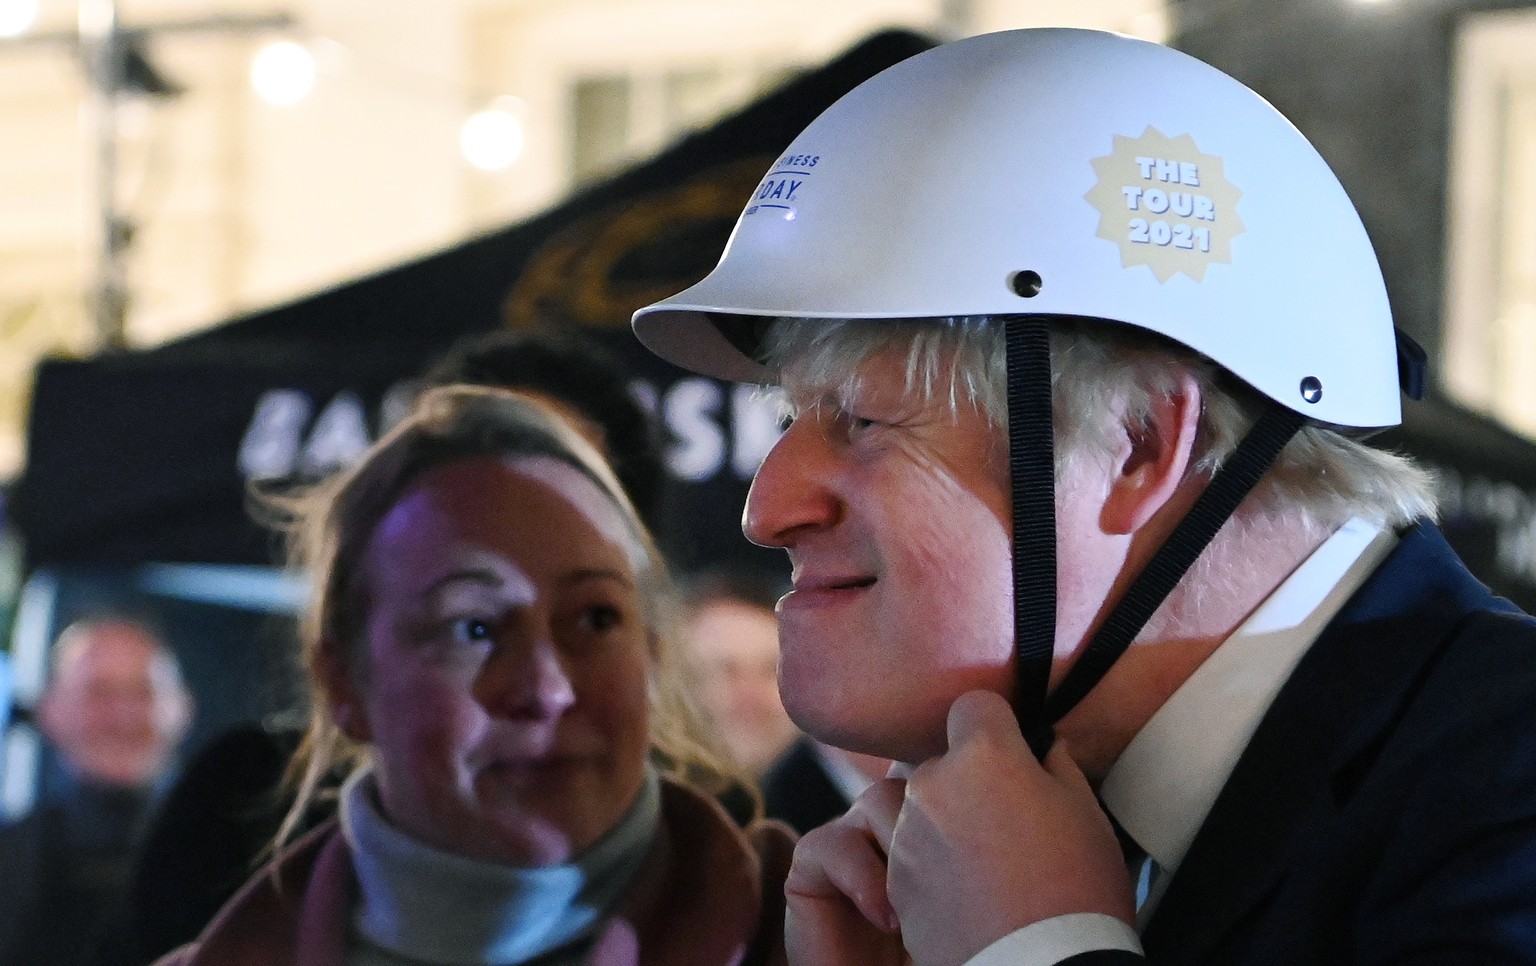 epa09613395 British Prime Minister Boris Johnson prepares to take off his helmet after riding on a bicycle around Christmas market outside 10 Downing Street in London, Britain, 30 November 2021. EPA/A ...